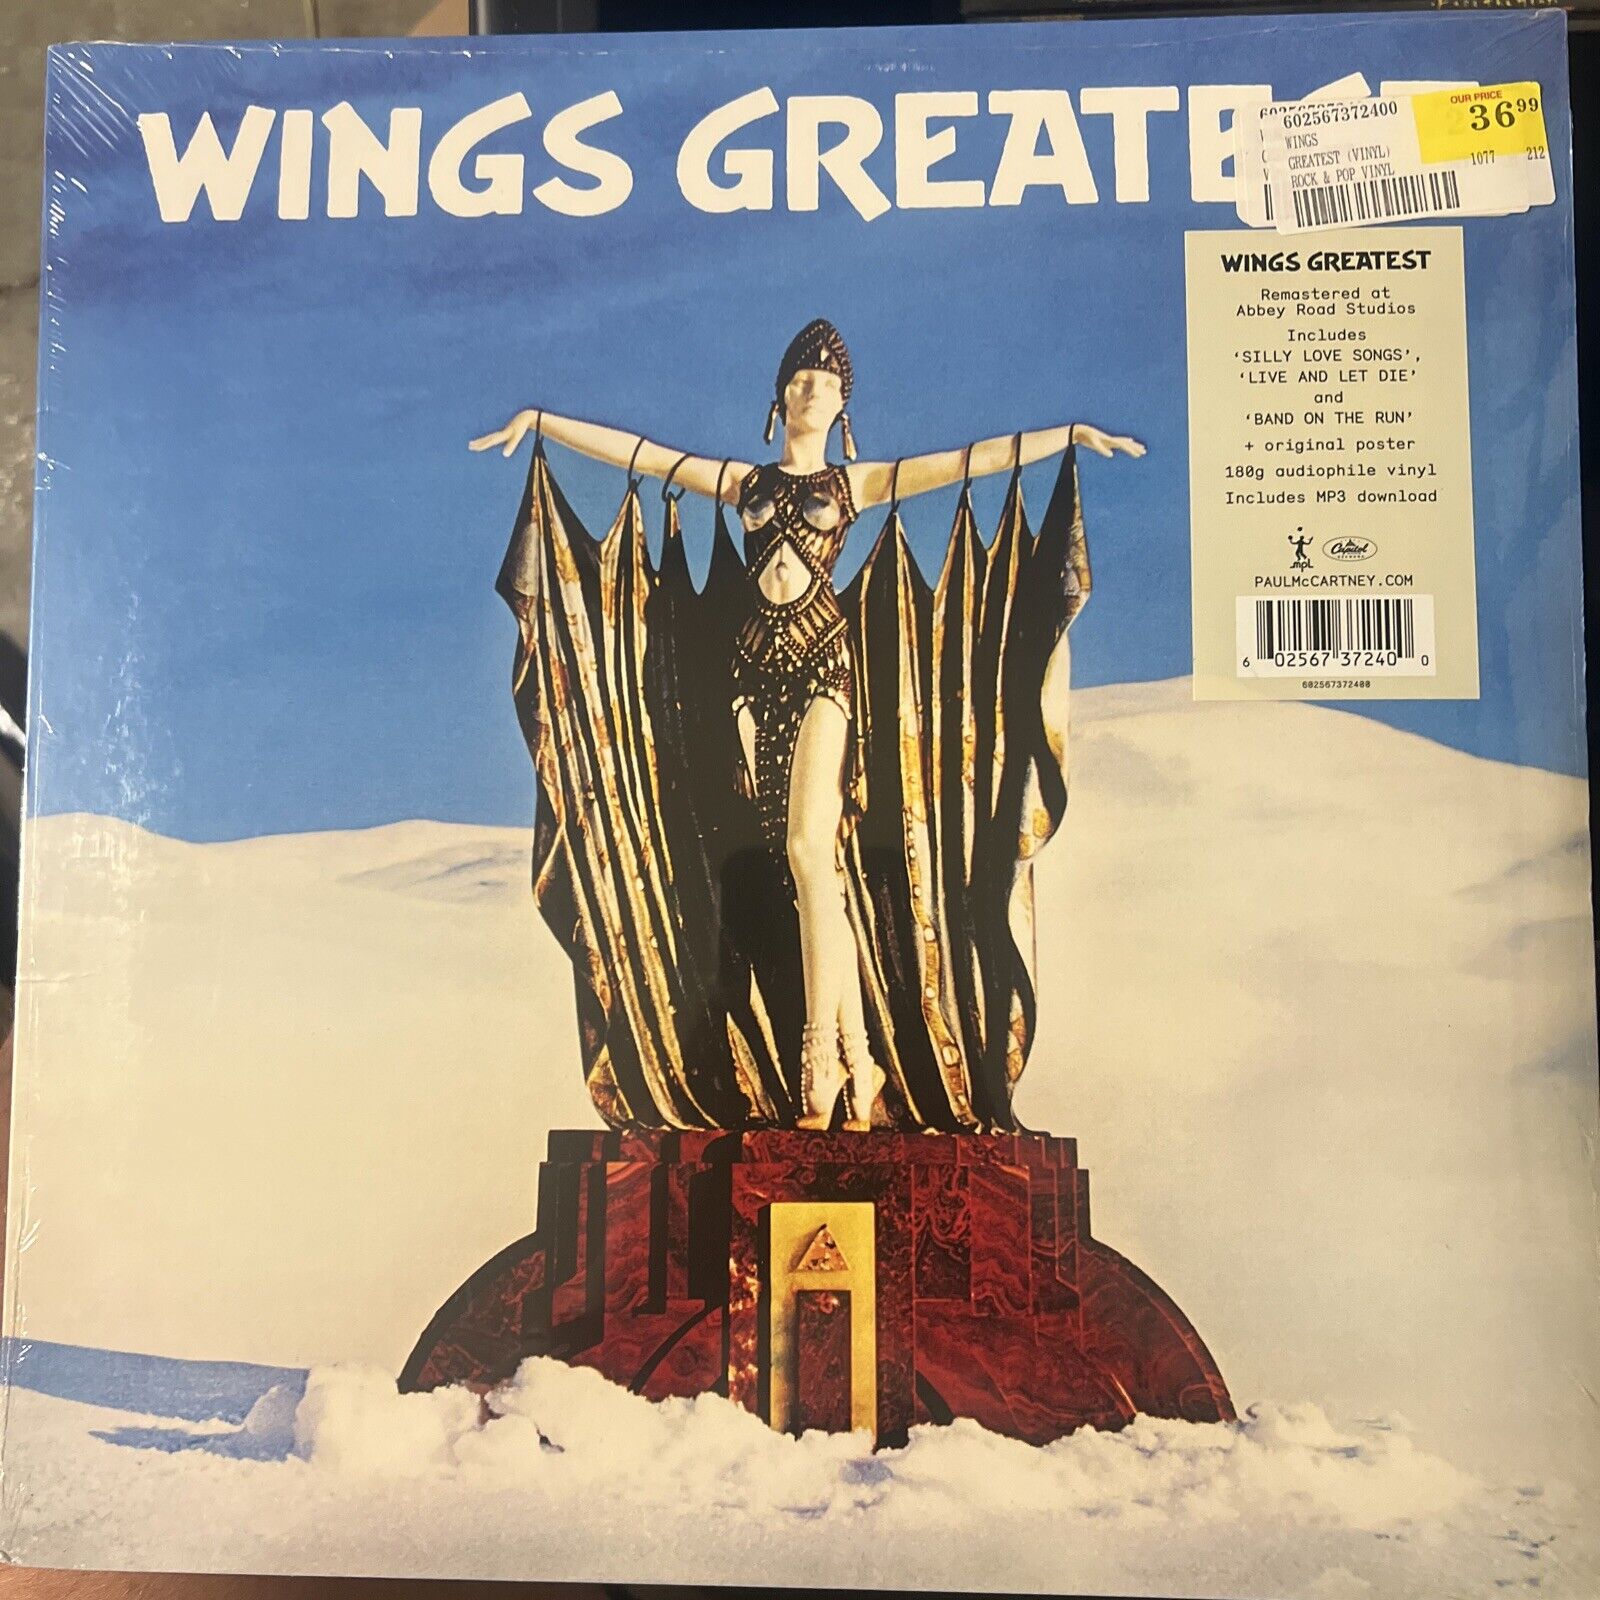 Wings Greatest Records & LPs New